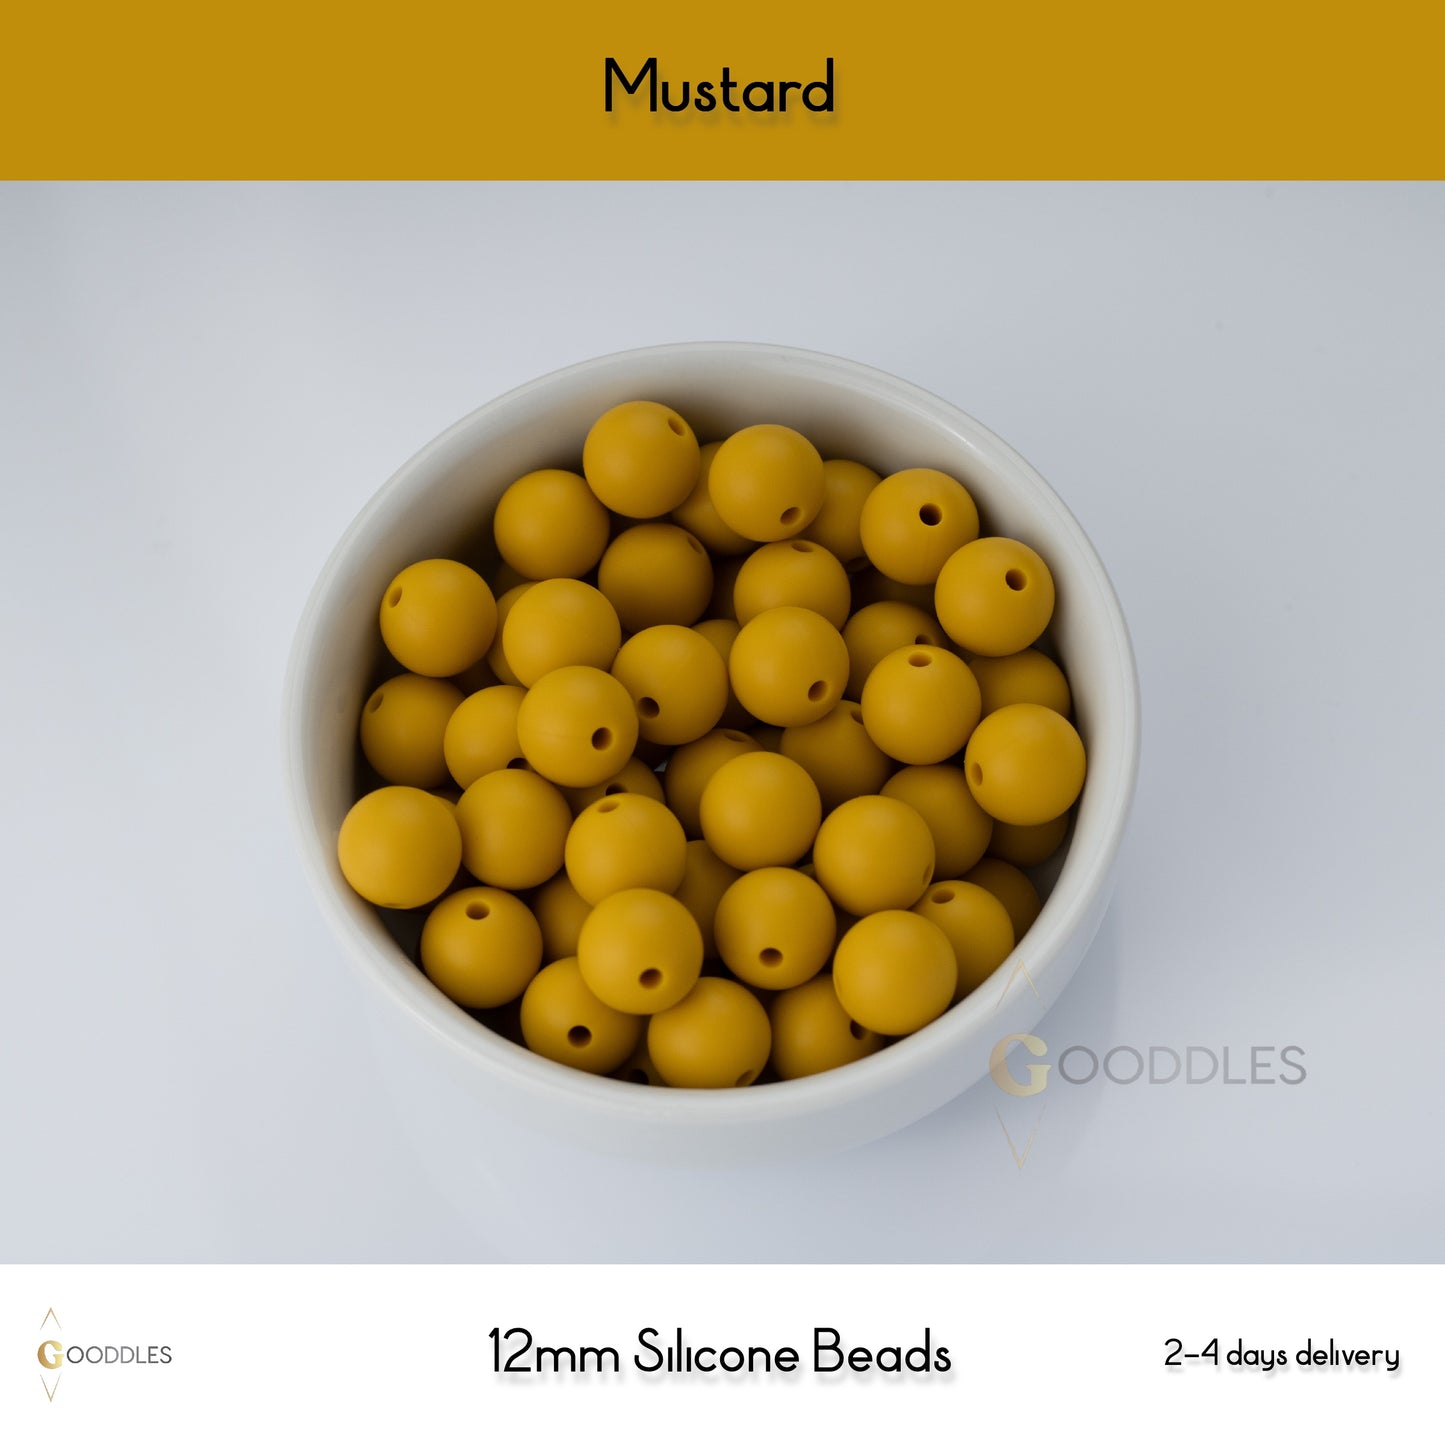 5pcs, Mustard Silicone Beads Round Silicone Beads